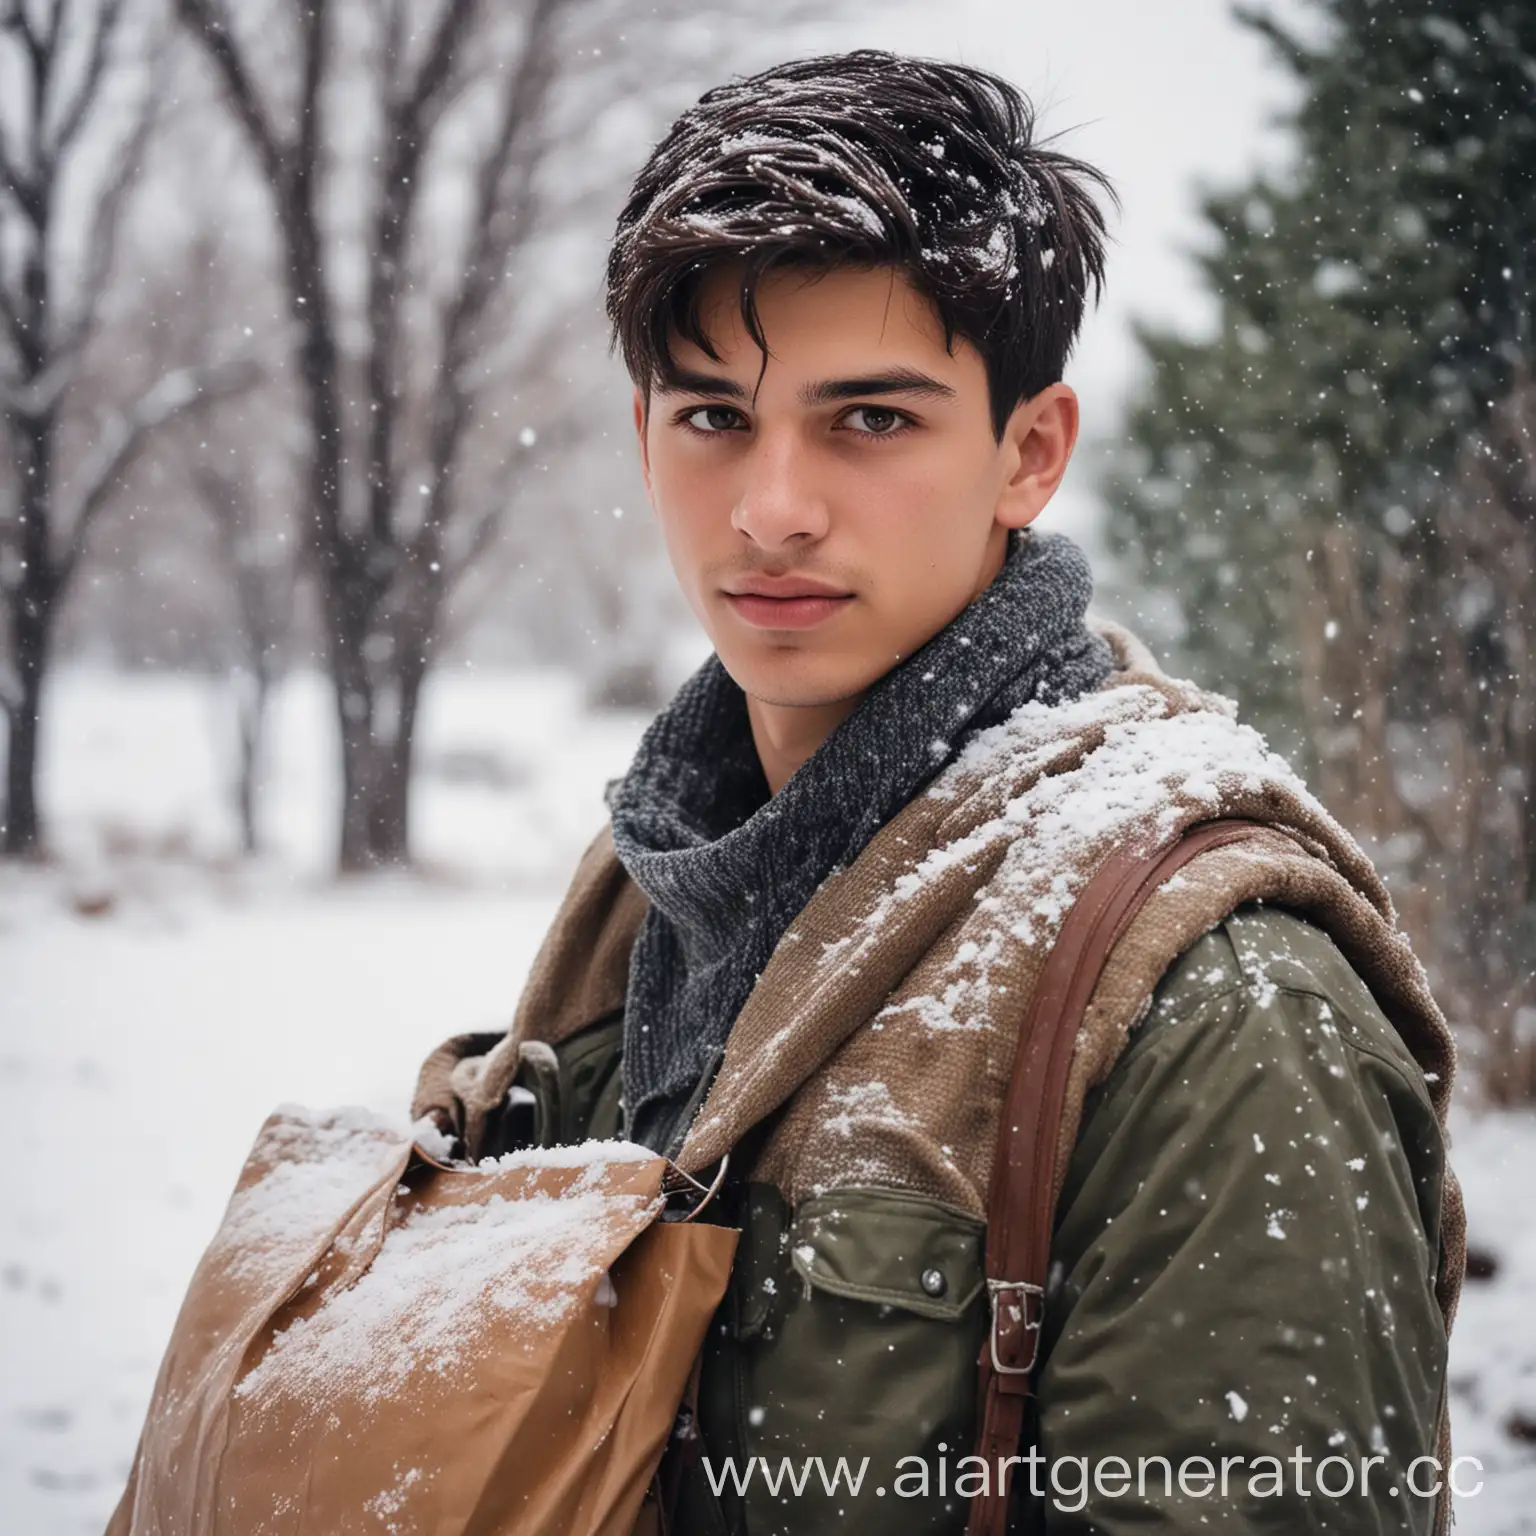 Young-Man-with-Dark-Hair-and-Bag-in-Snowy-Landscape